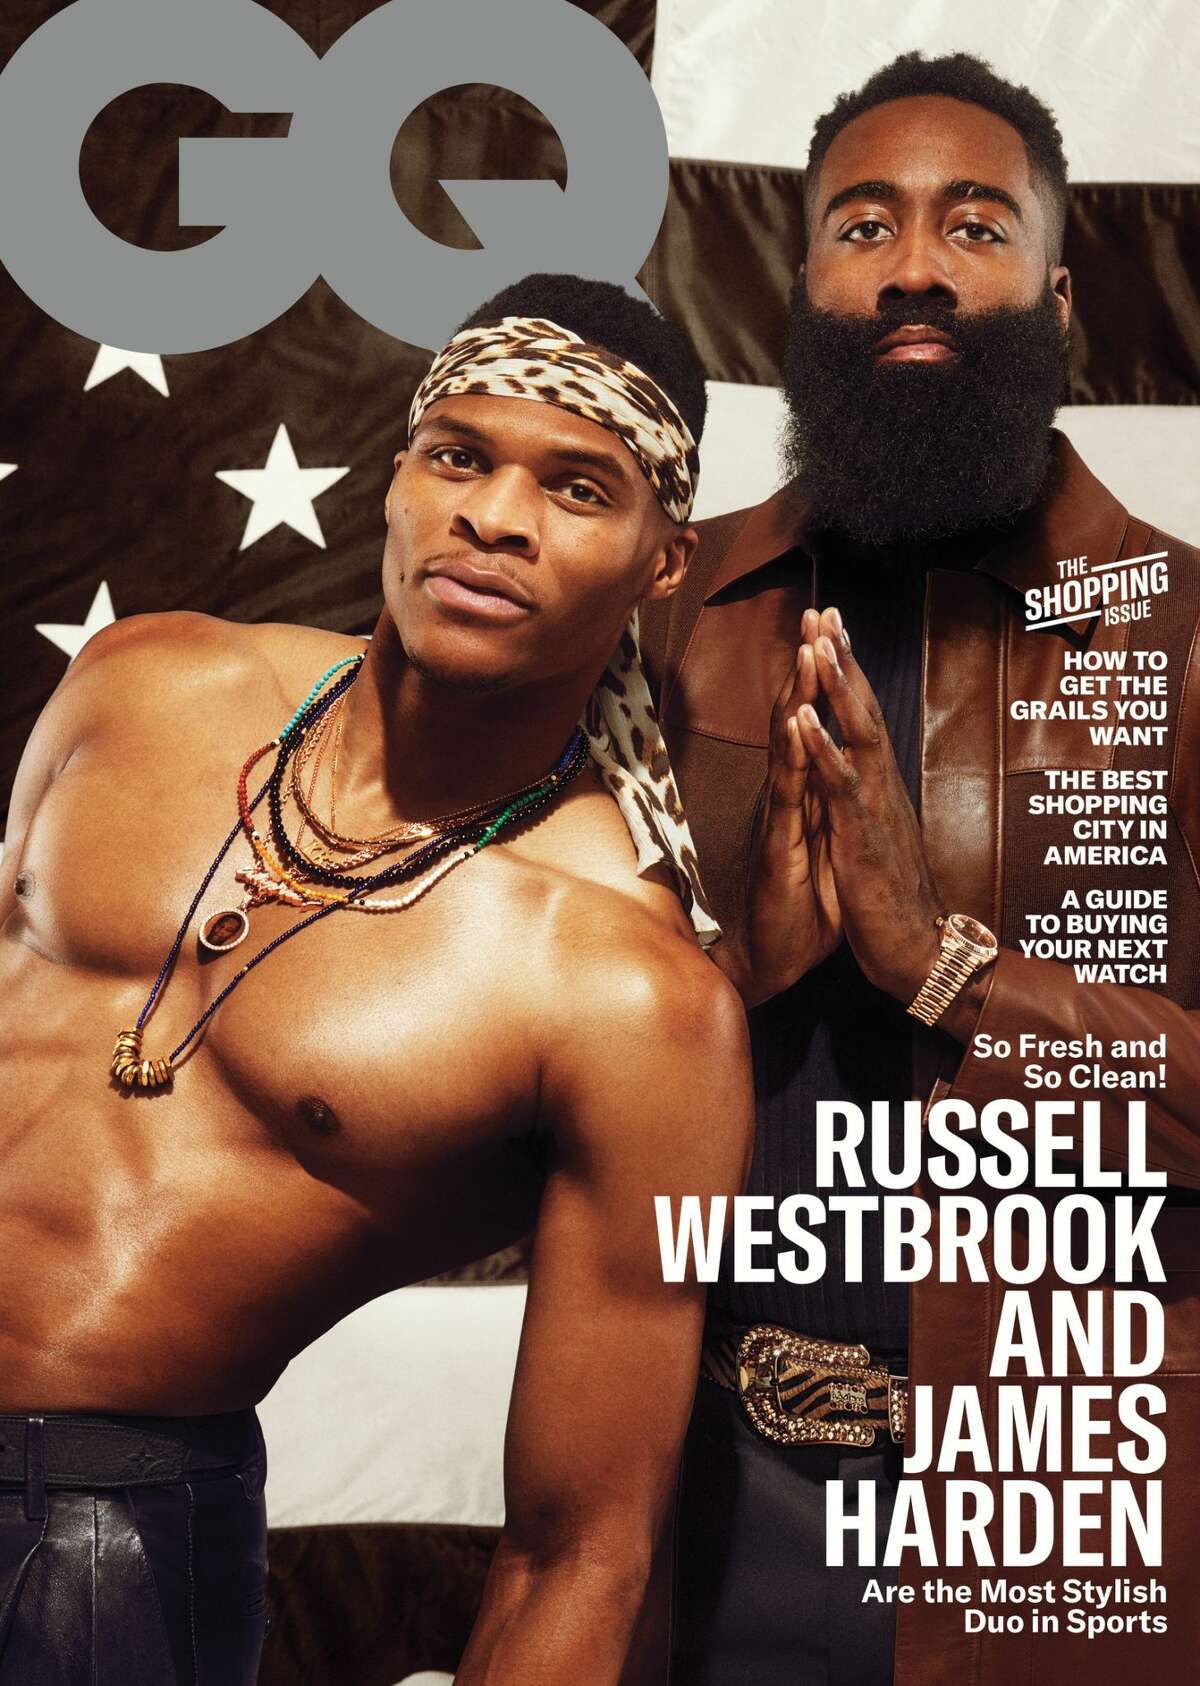 Houston Rockets star James Harden graces the GQ cover, shares personal  details in interview